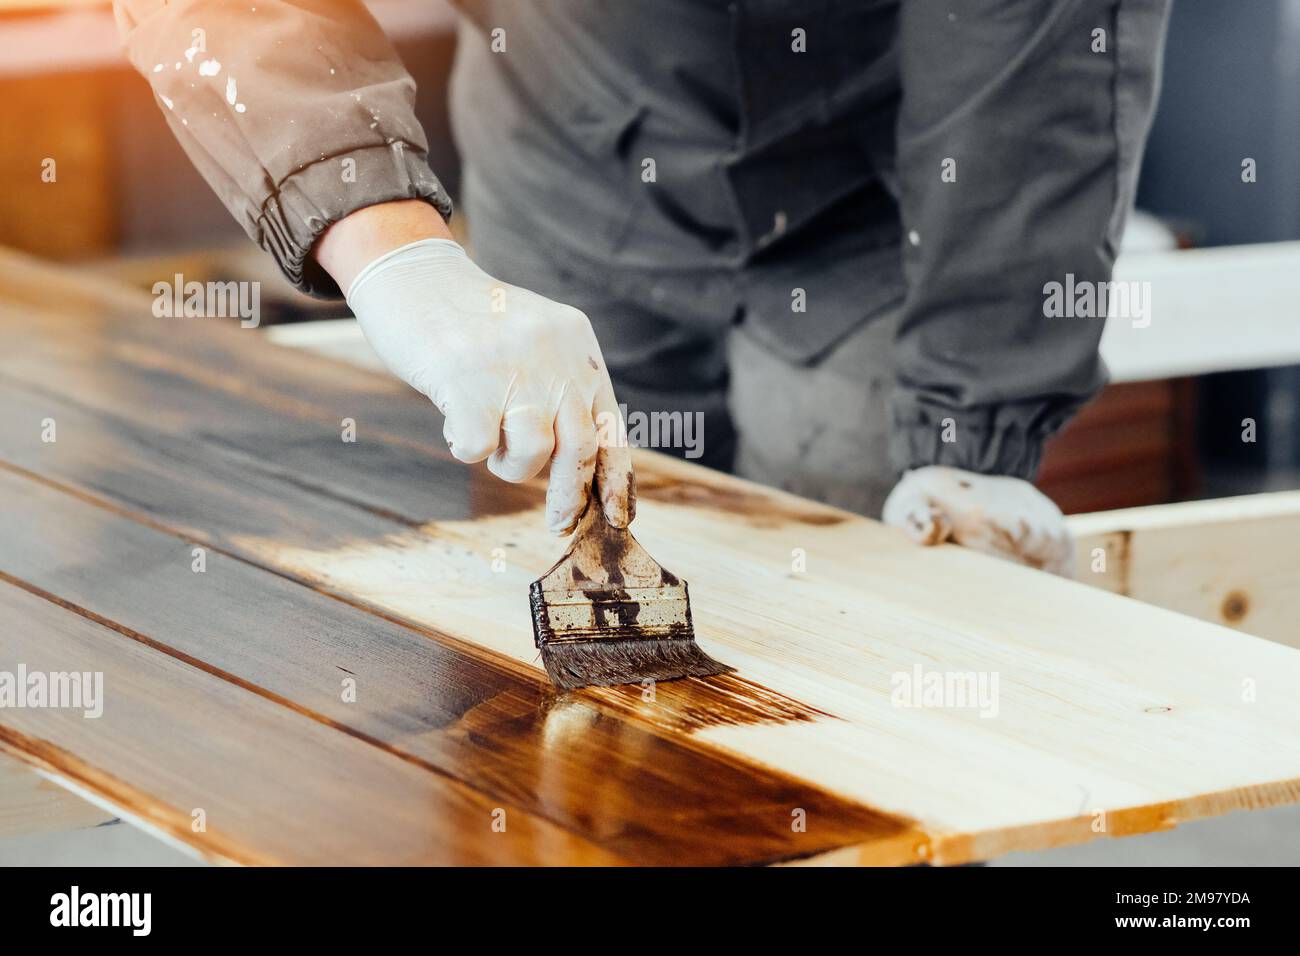 Man paints wooden boards with paint brush. Carpenter cabinetmaker varnishes wooden surface. Authentic workflow.. Stock Photo